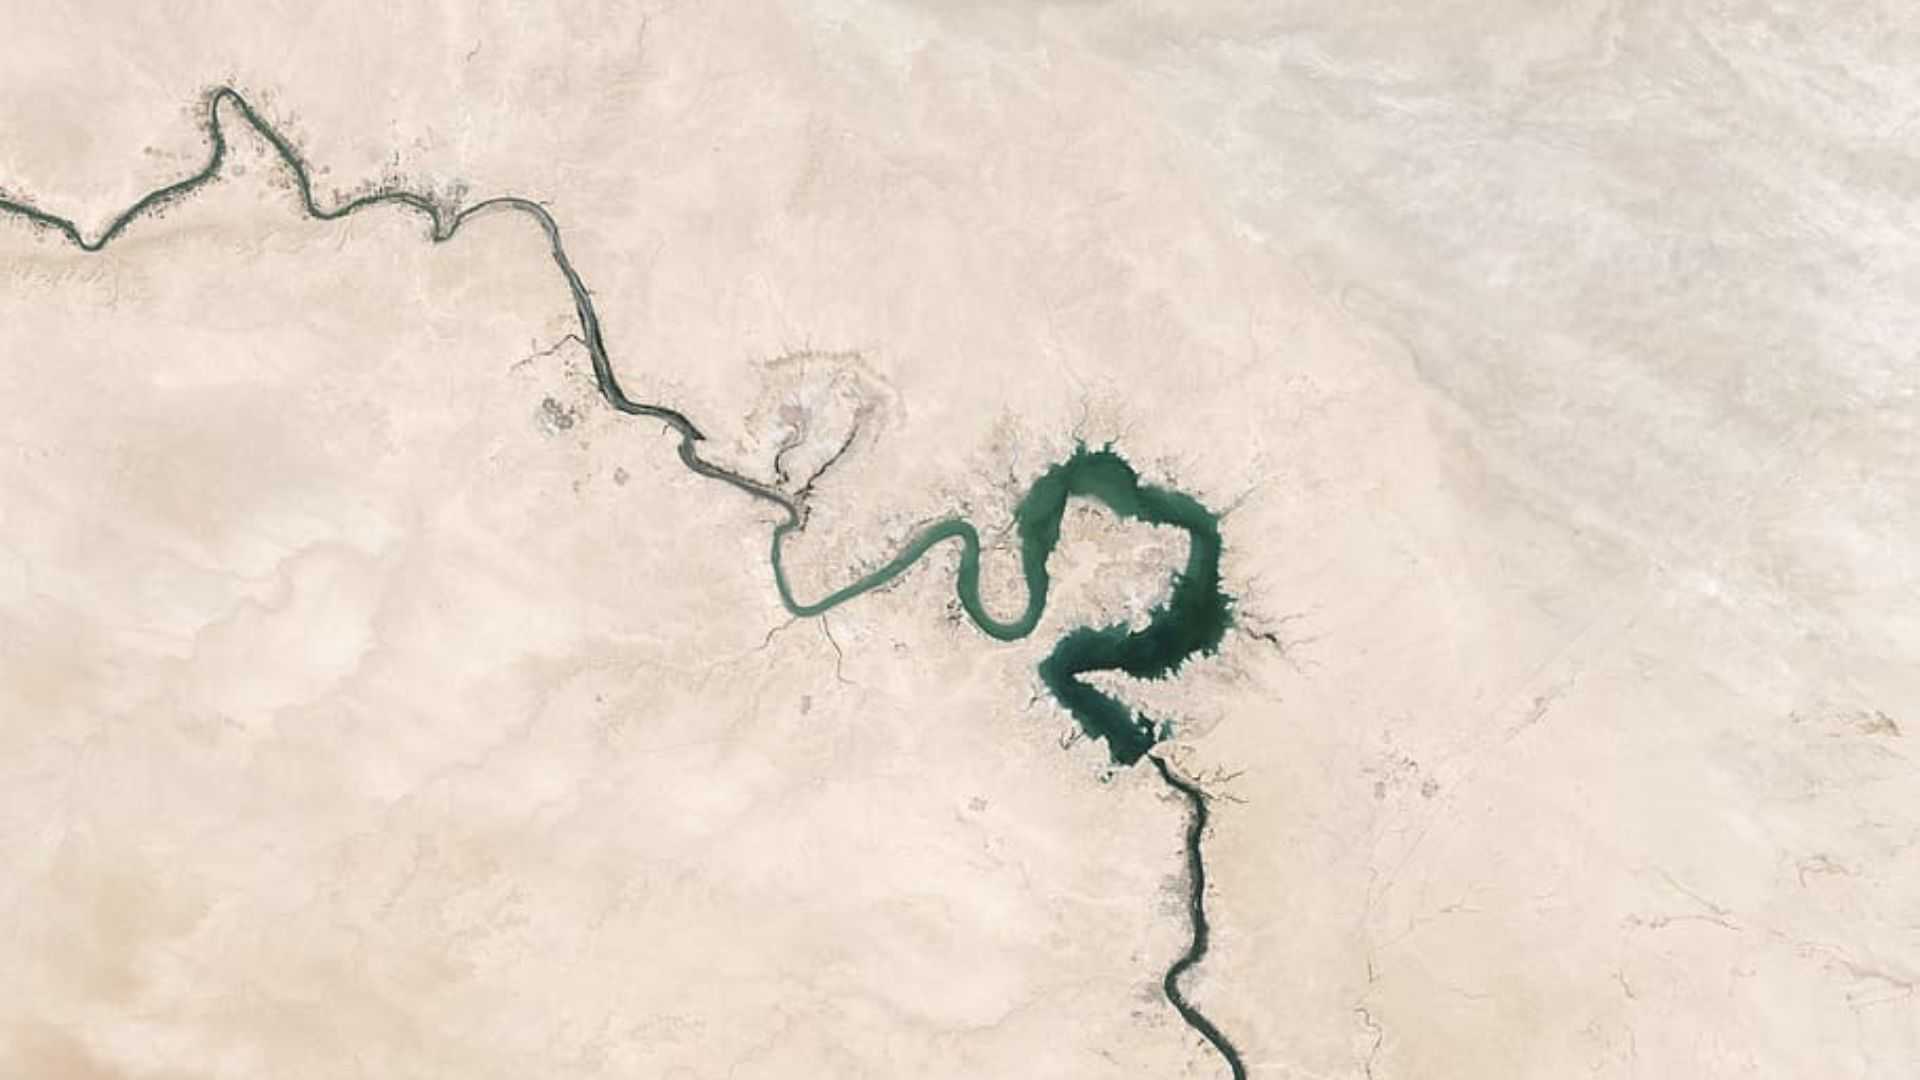 Euphrates River drying up in Islam and Mountain of Gold Sign of Qiyamah